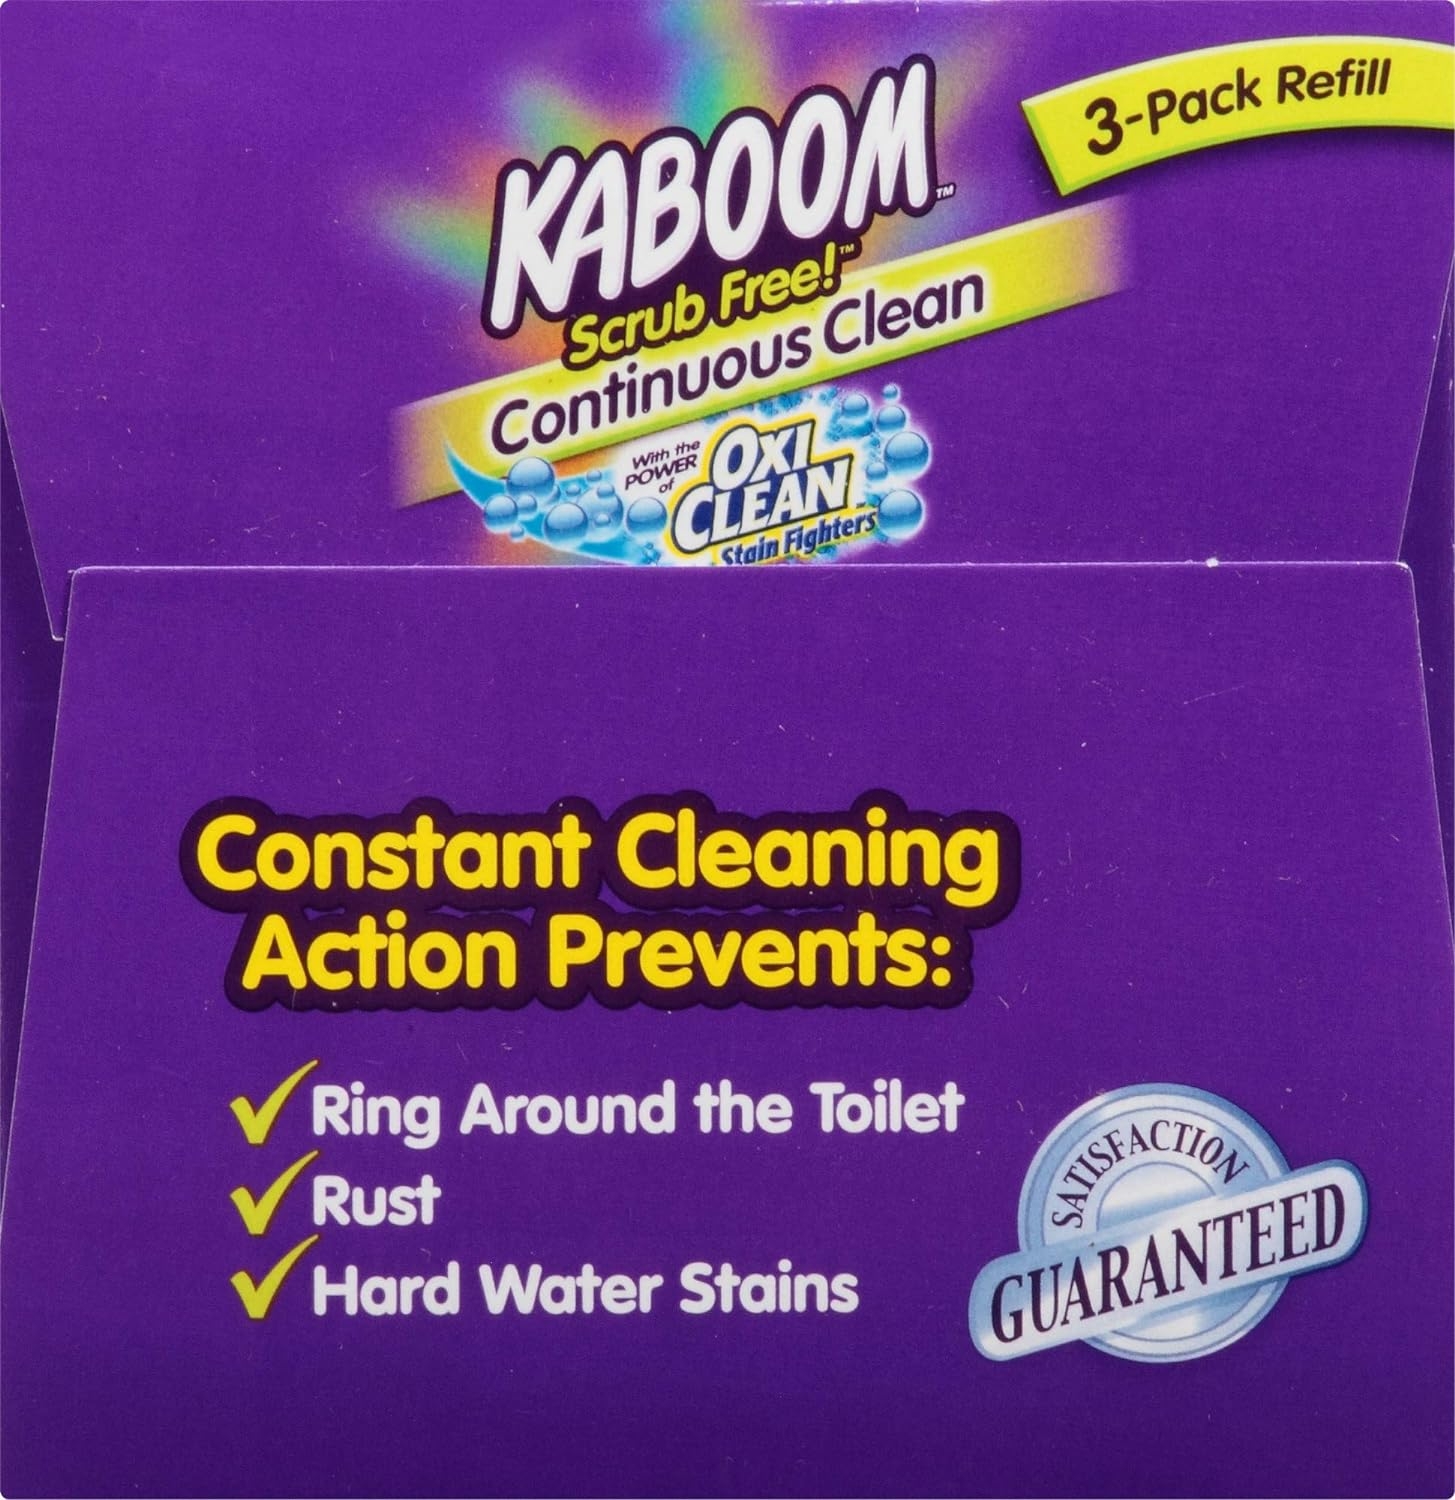 3-Pack Refill – Kaboom Scrub Free! Continuous Clean with OxiClean